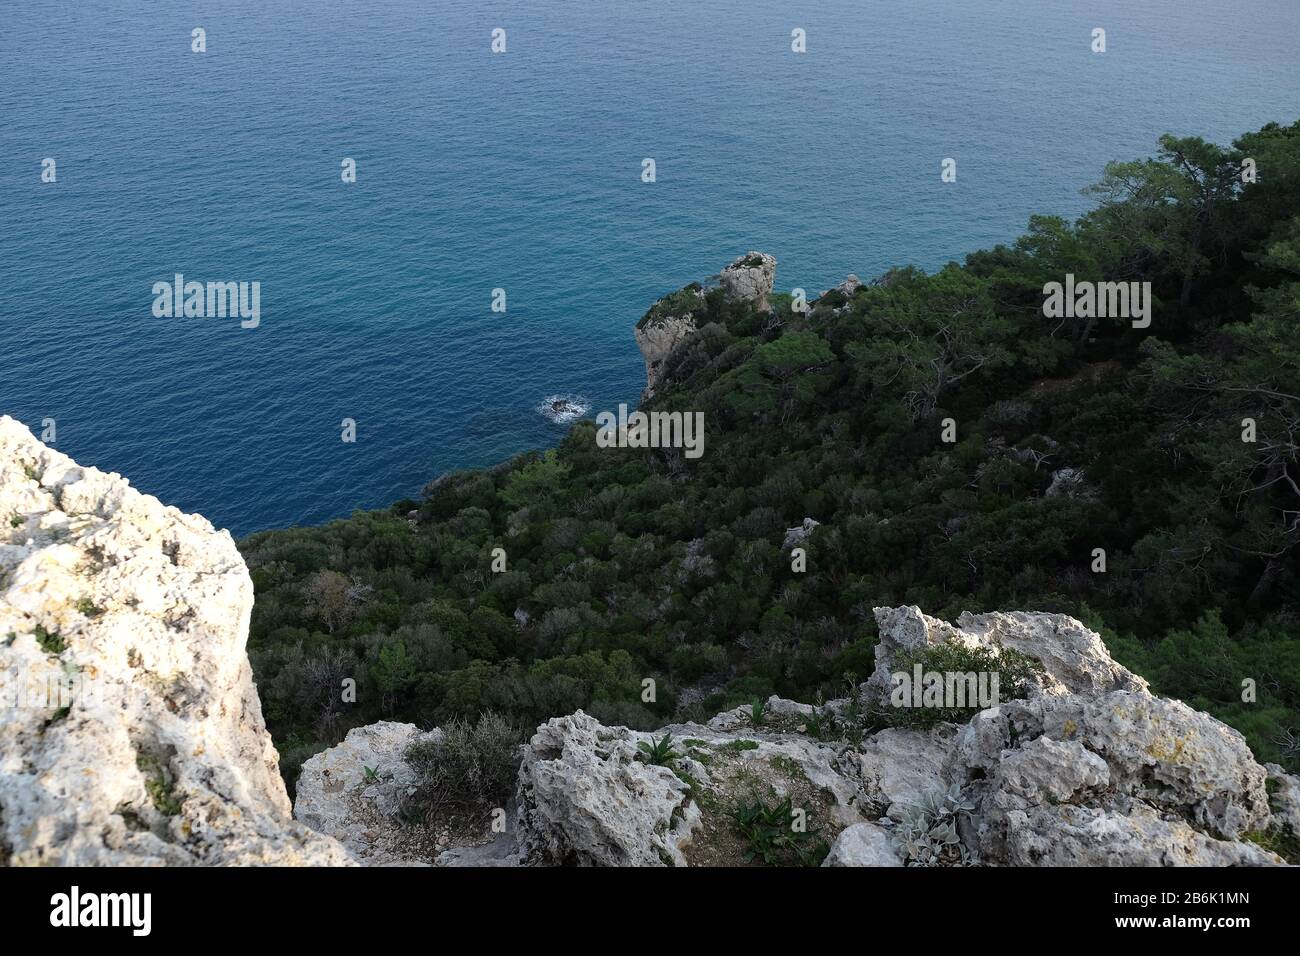 Landscape with high mountains covered with dense southern vegetation and wonderful clean turquoise sea water sea far below Stock Photo